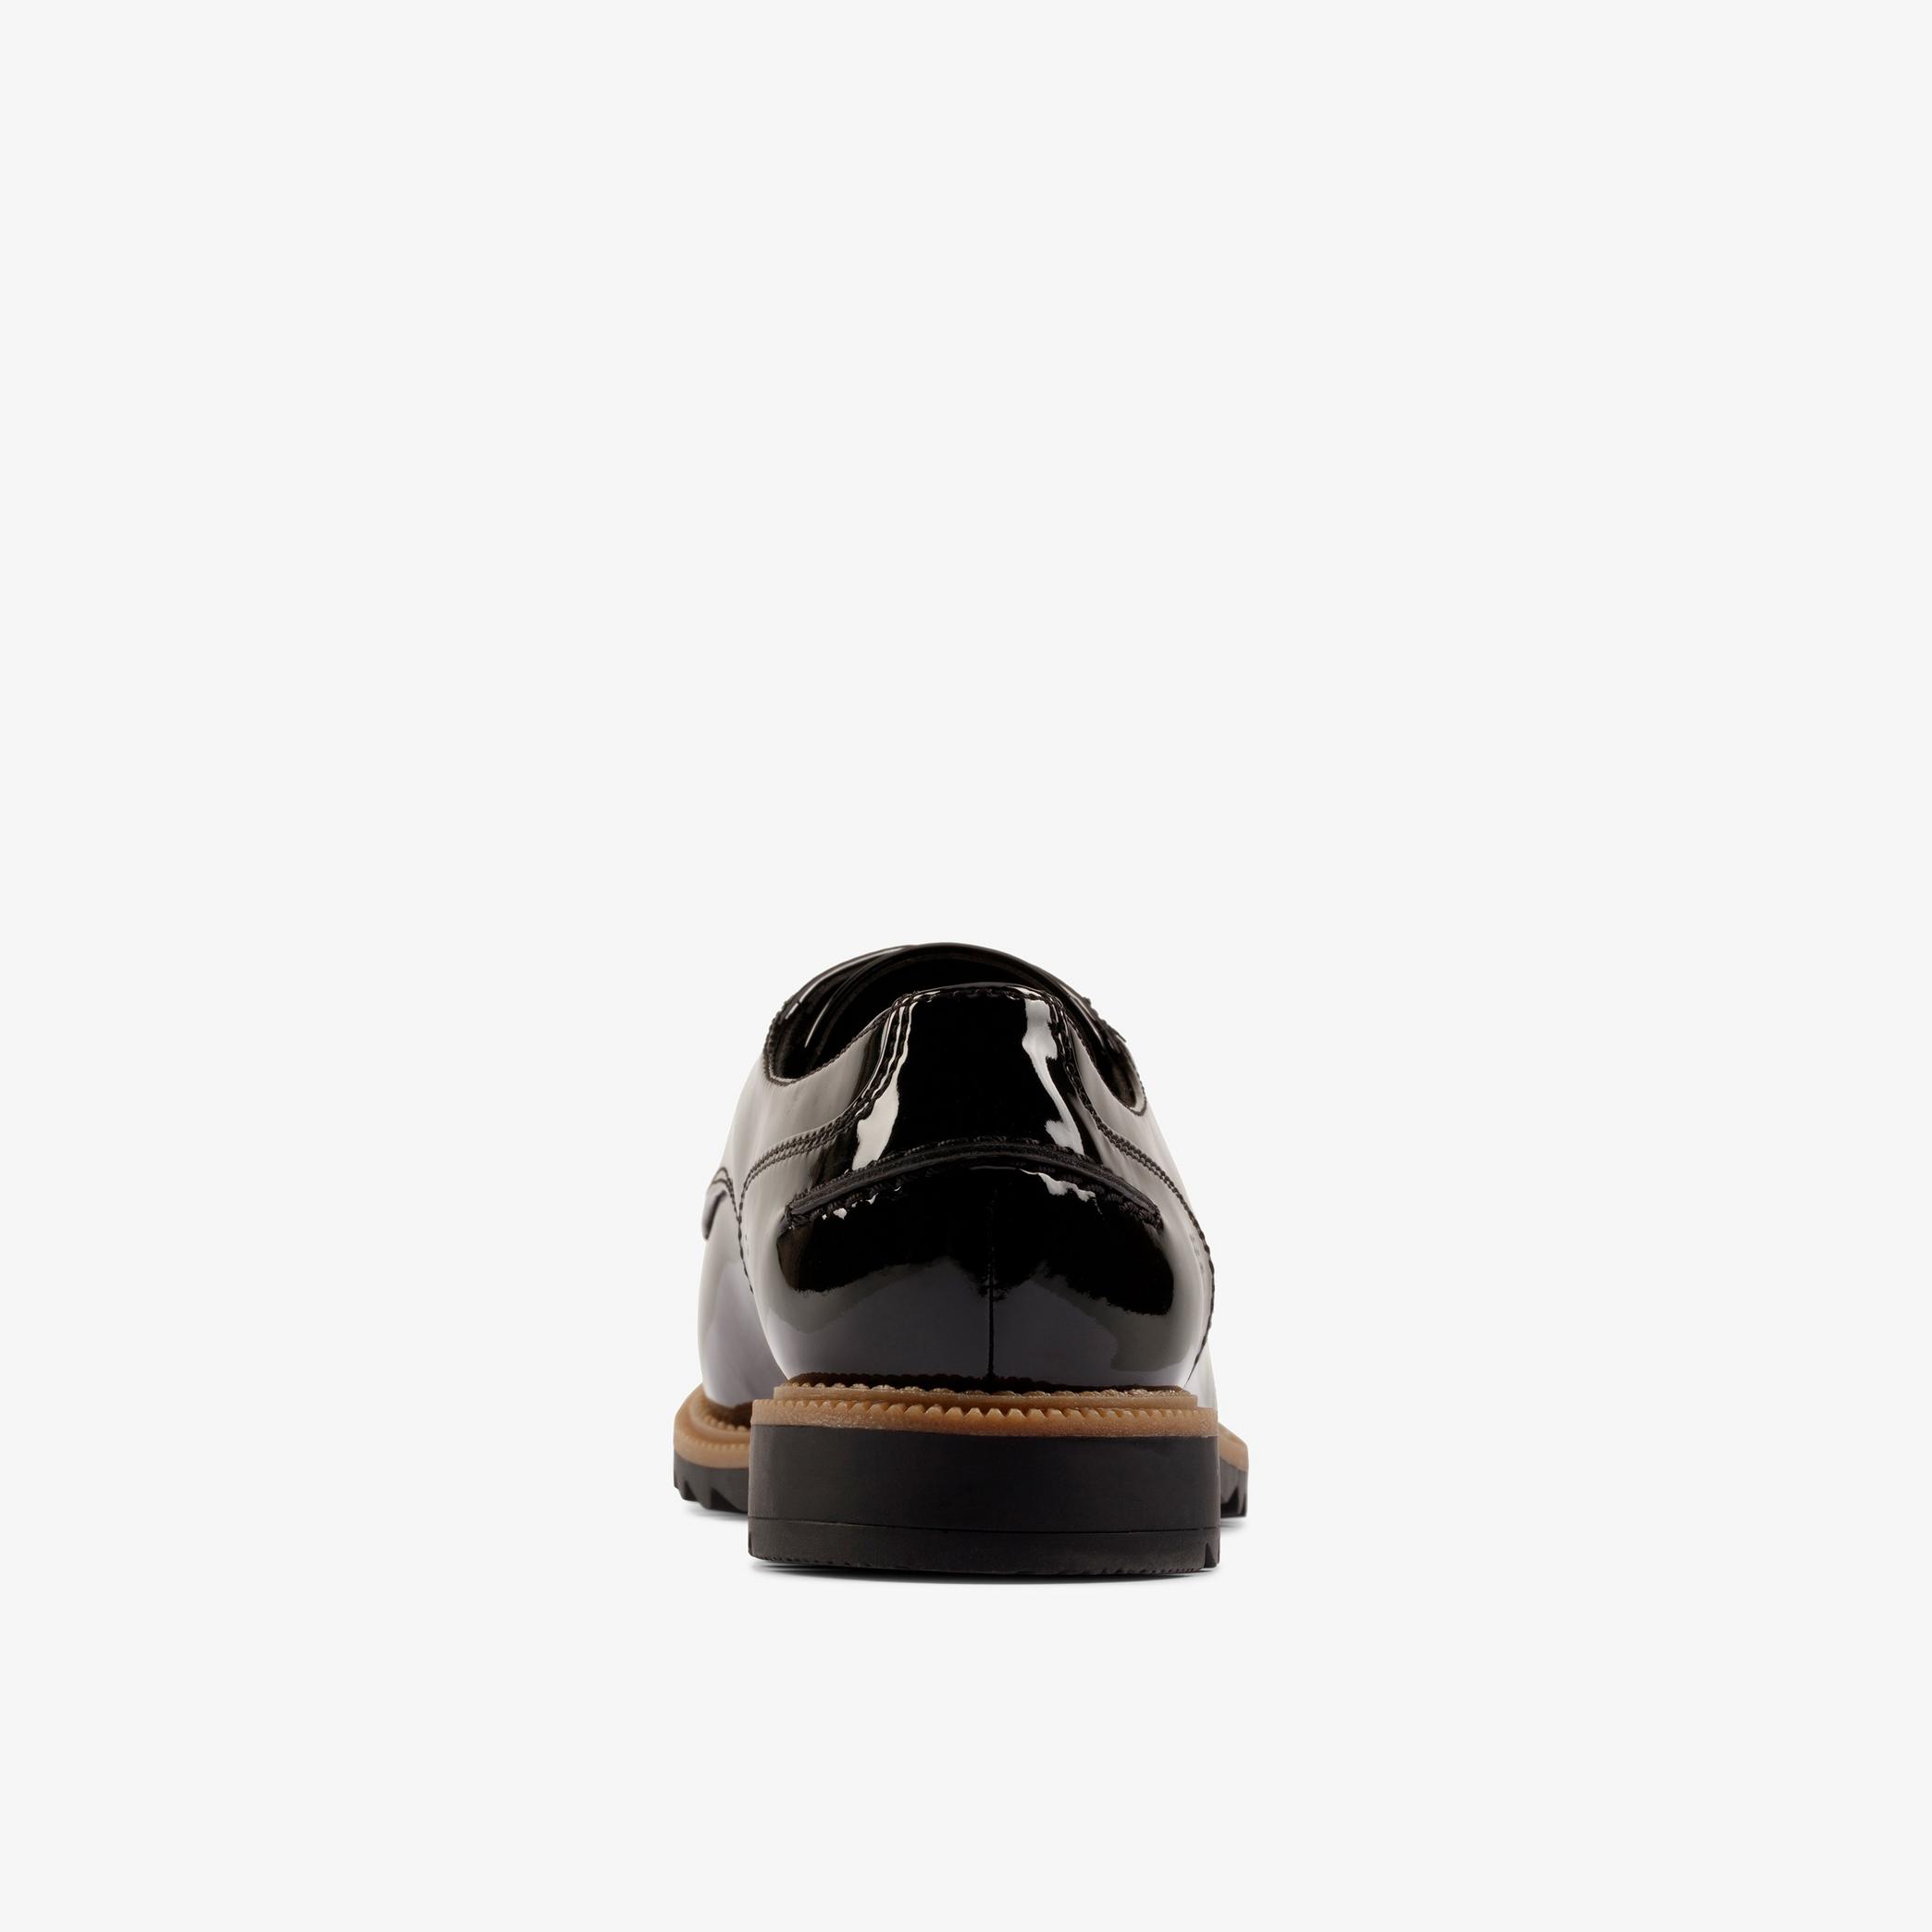 Griffin Mabel Black Patent Brogues, view 5 of 6